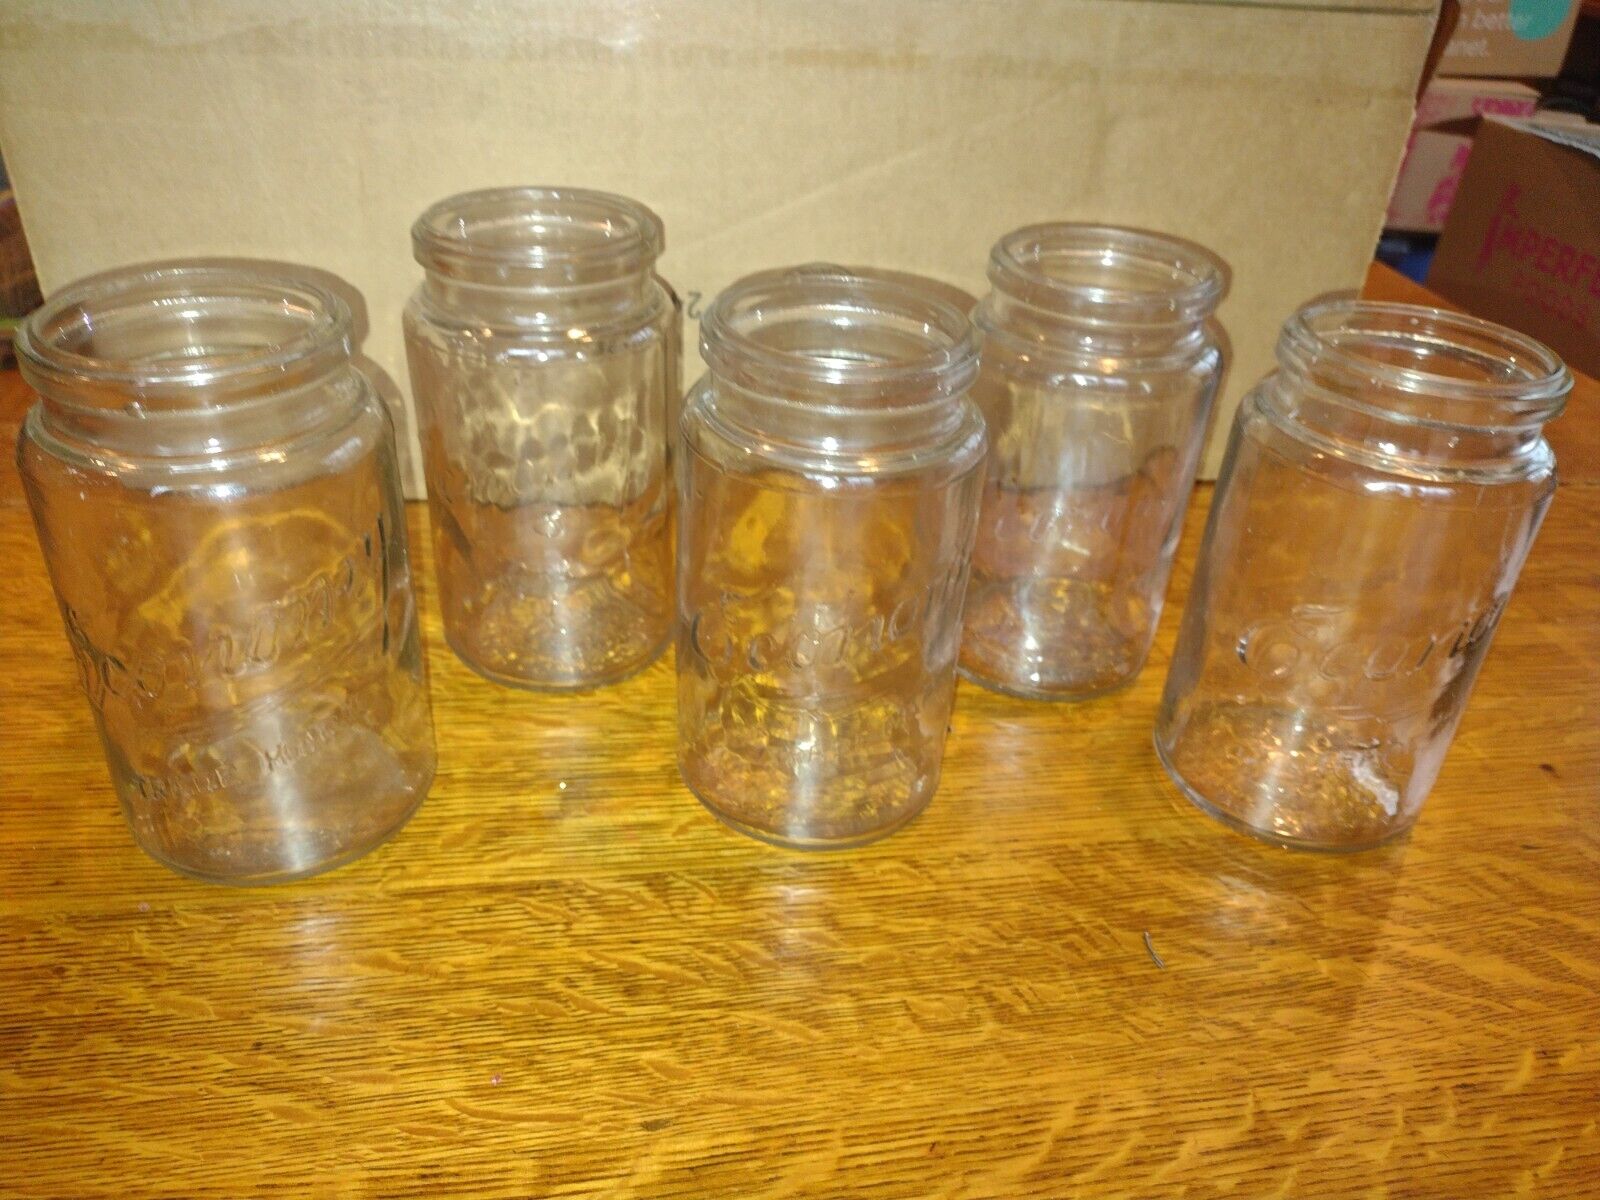 5 Genuine Antique Kerr “Economy” Canning Jar - one has a 1903 patent date on it